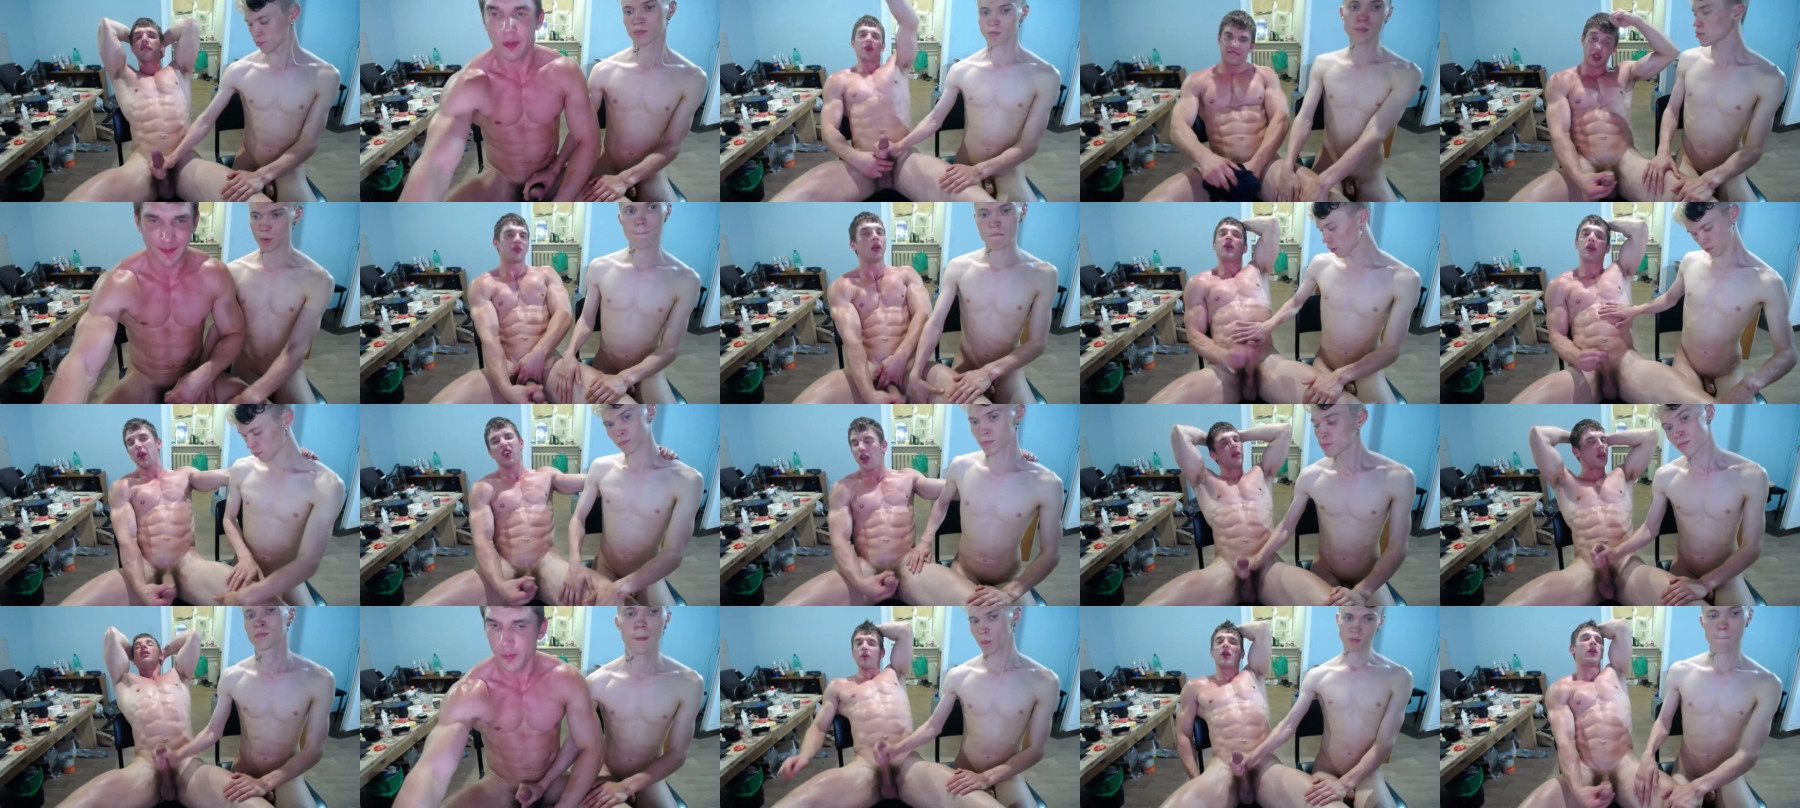 Max_232  22-05-2021 Male Topless